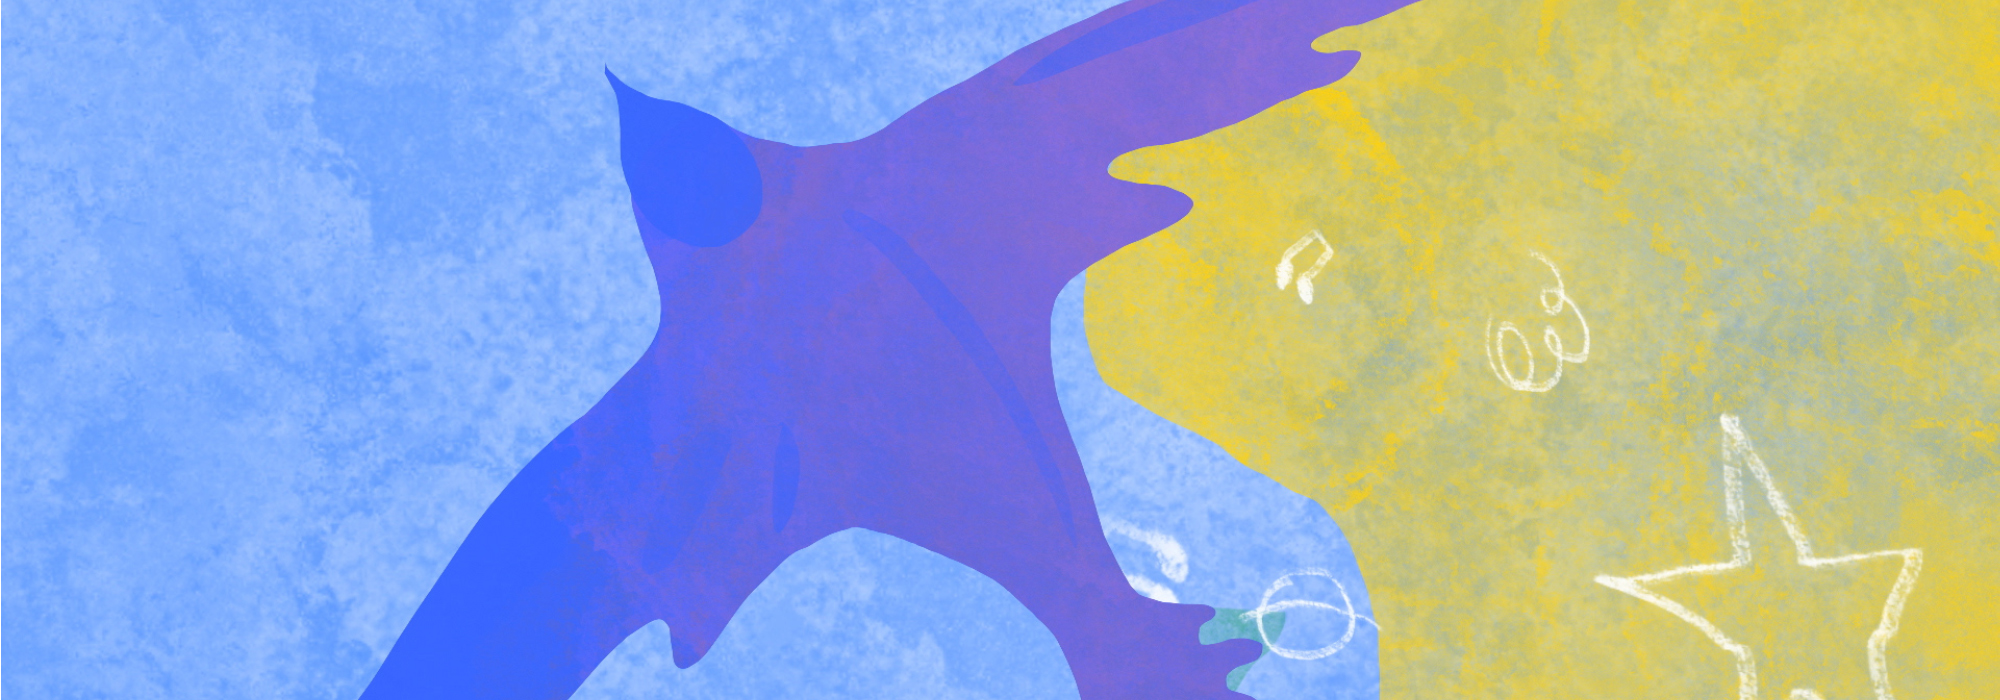 artwork of a purple bird on a blue and yellow background